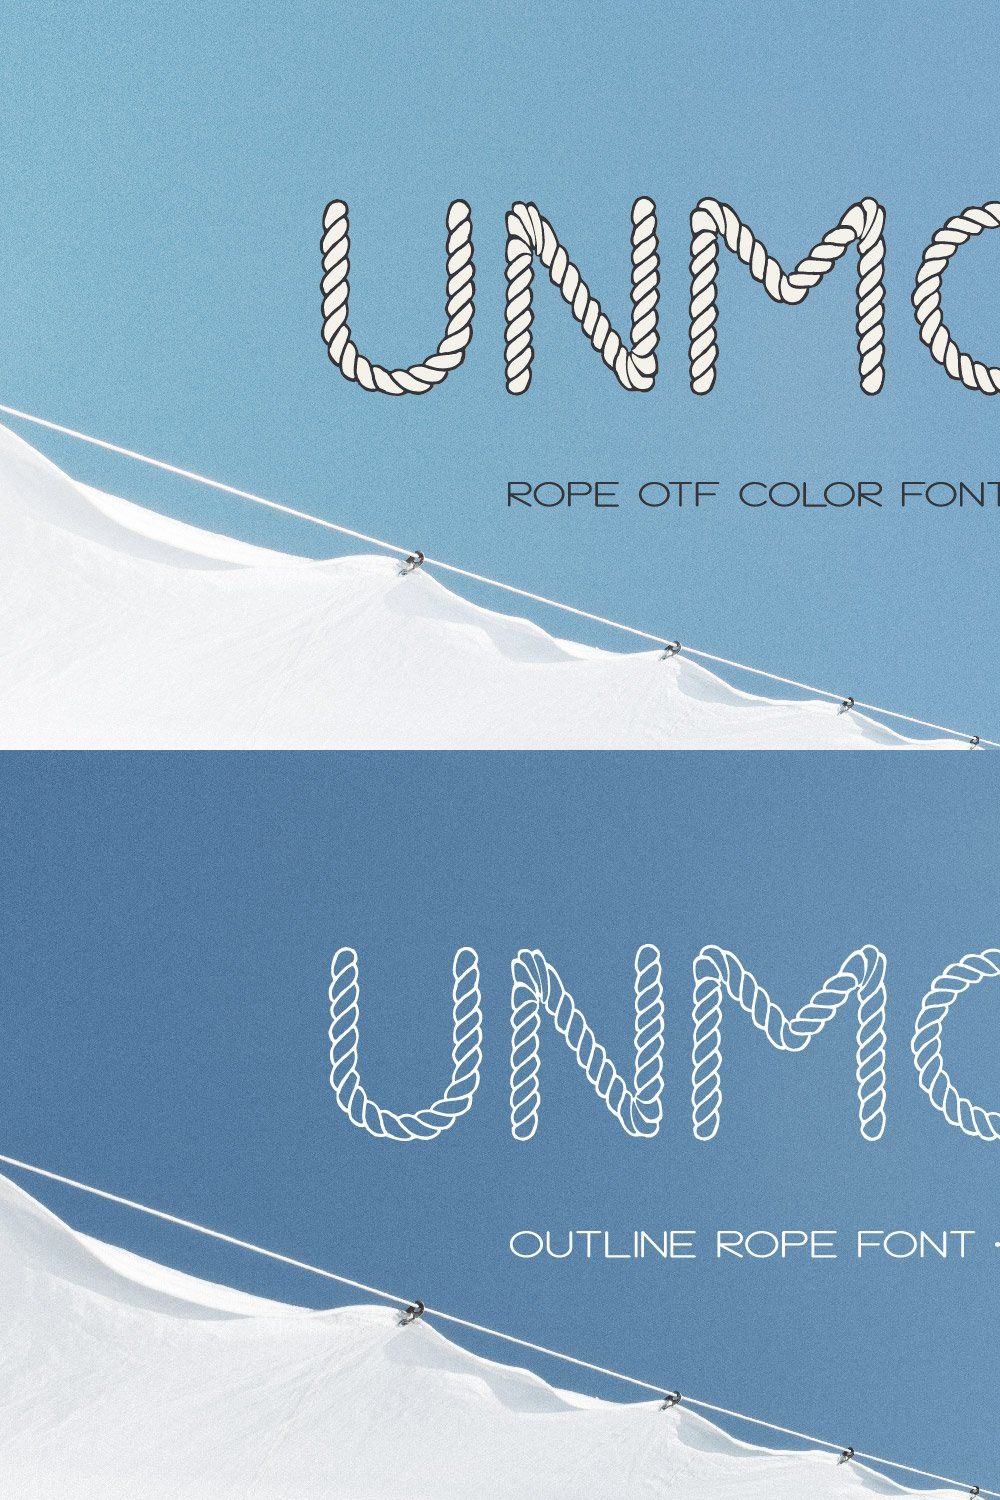 Unmoor - Color and Outline Rope Font pinterest preview image.